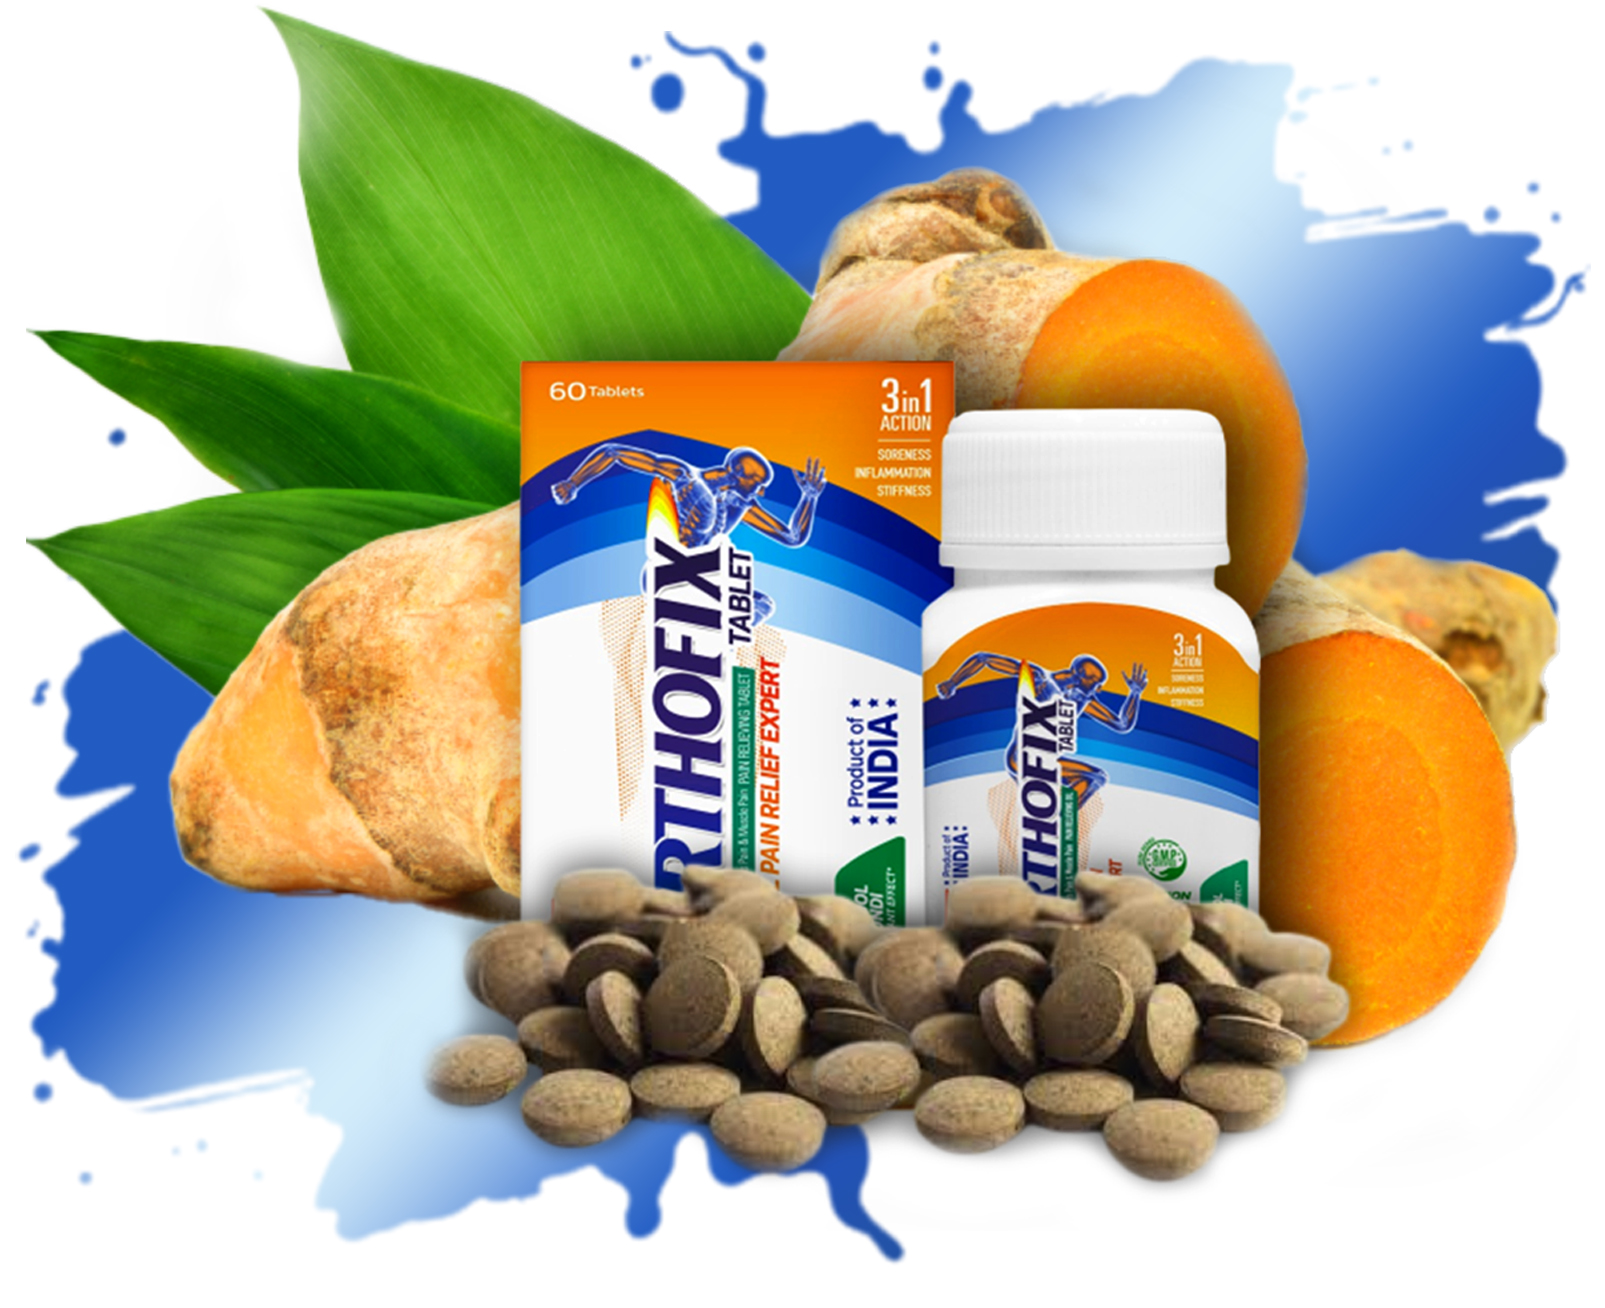 A Bottle of Arthofix Tablet, a herbal pain relief solution along with its packaging surrounding by its key ingredients